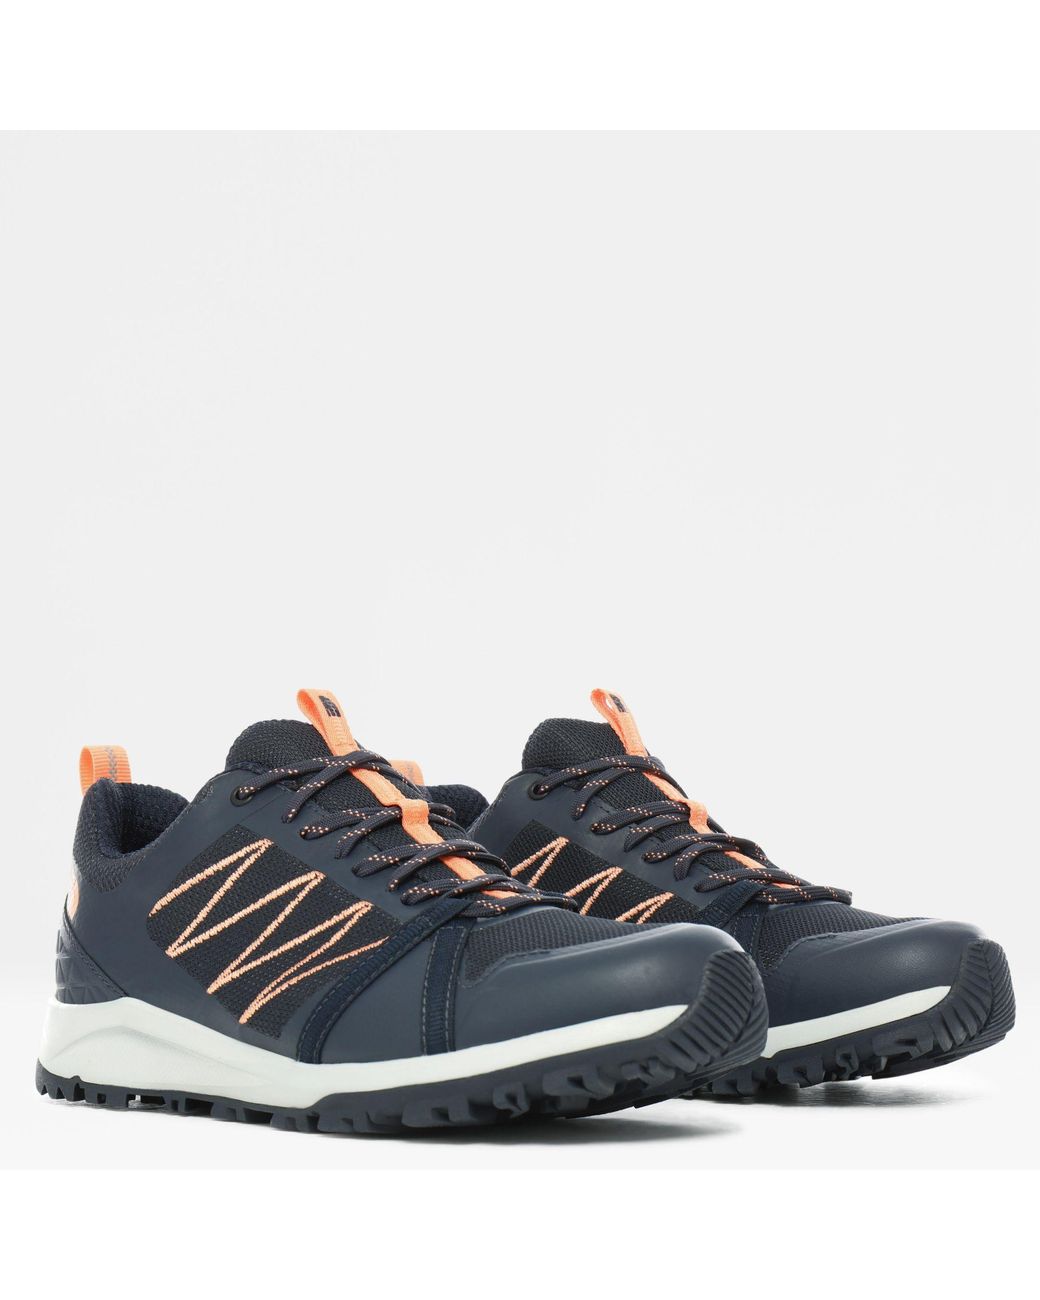 The North Face Litewave Fastpack Ii Waterproof Shoes in Blue | Lyst UK